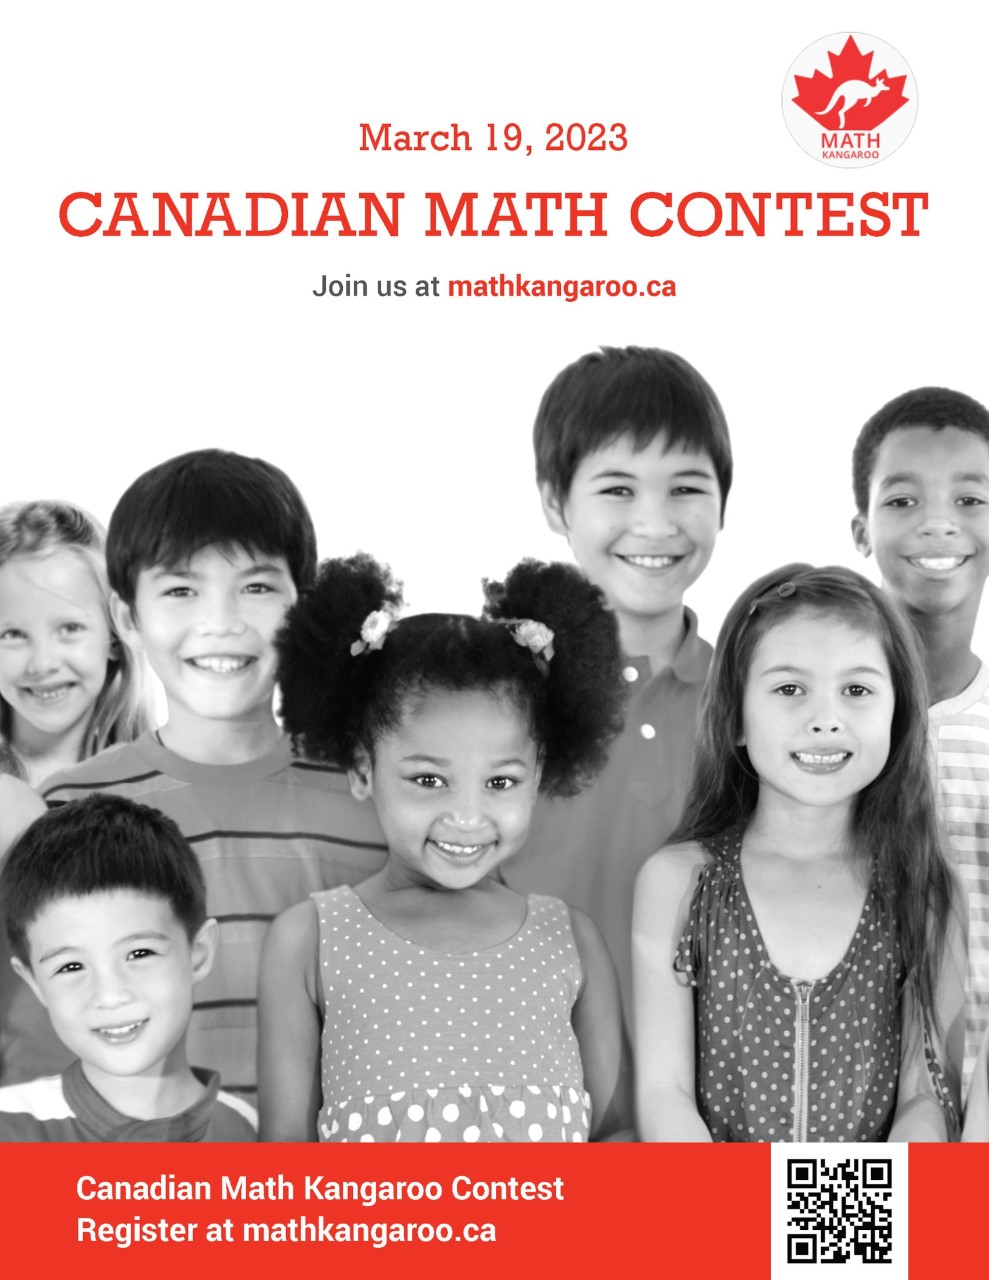 Canadian Math Kangaroo Contest 2023 promotional flyer-- March 19